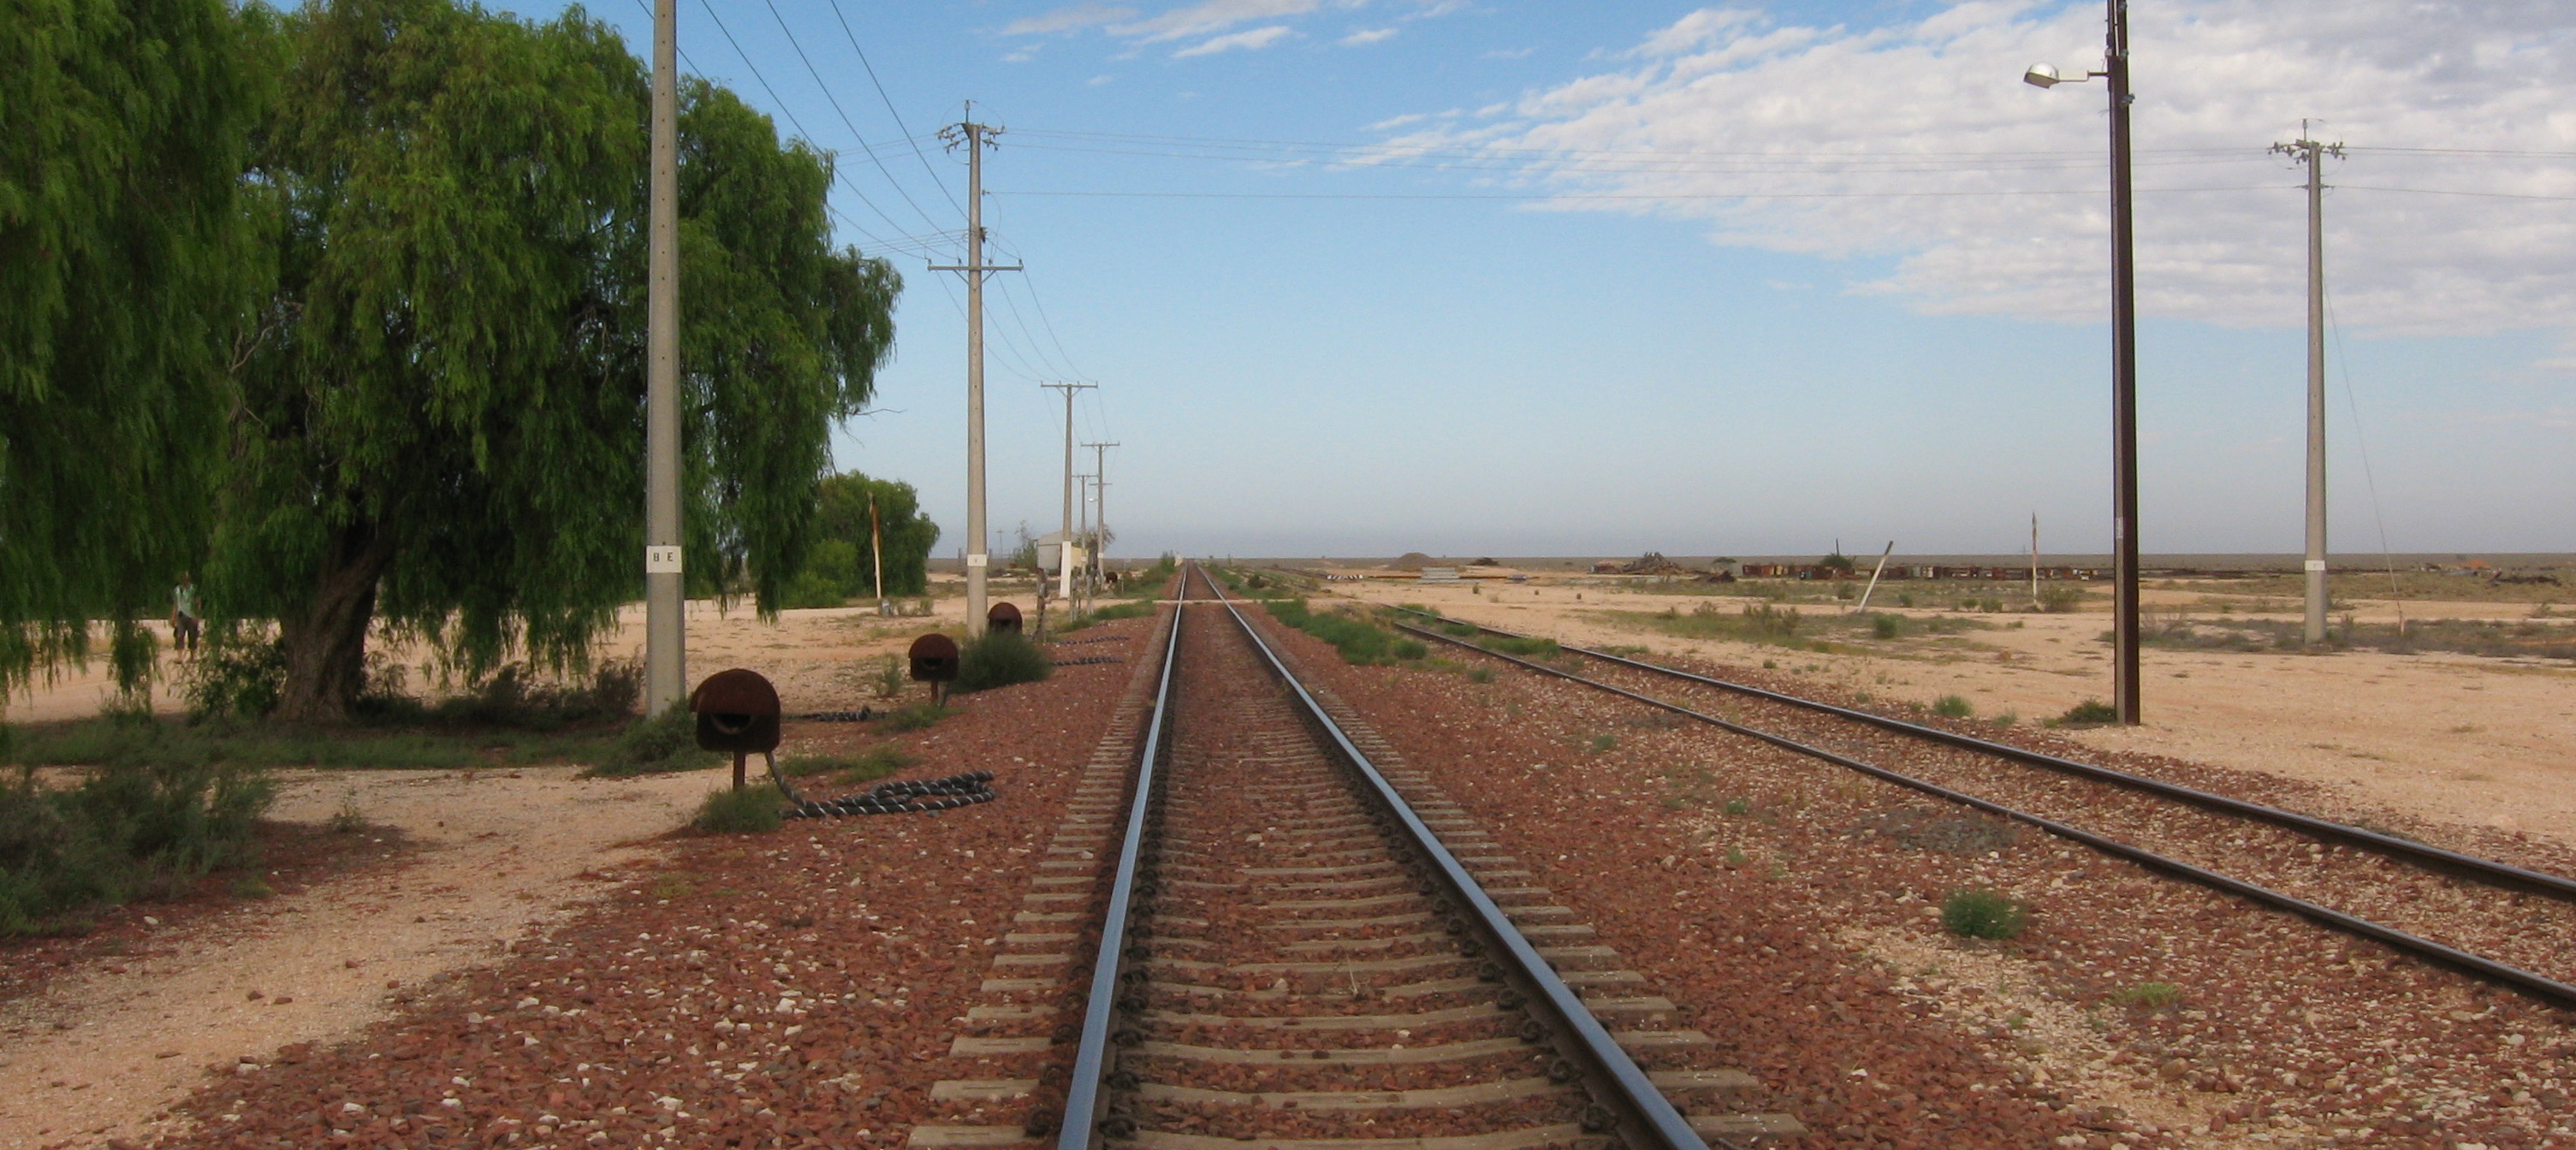 Australia Revisited: The Indian Pacific.